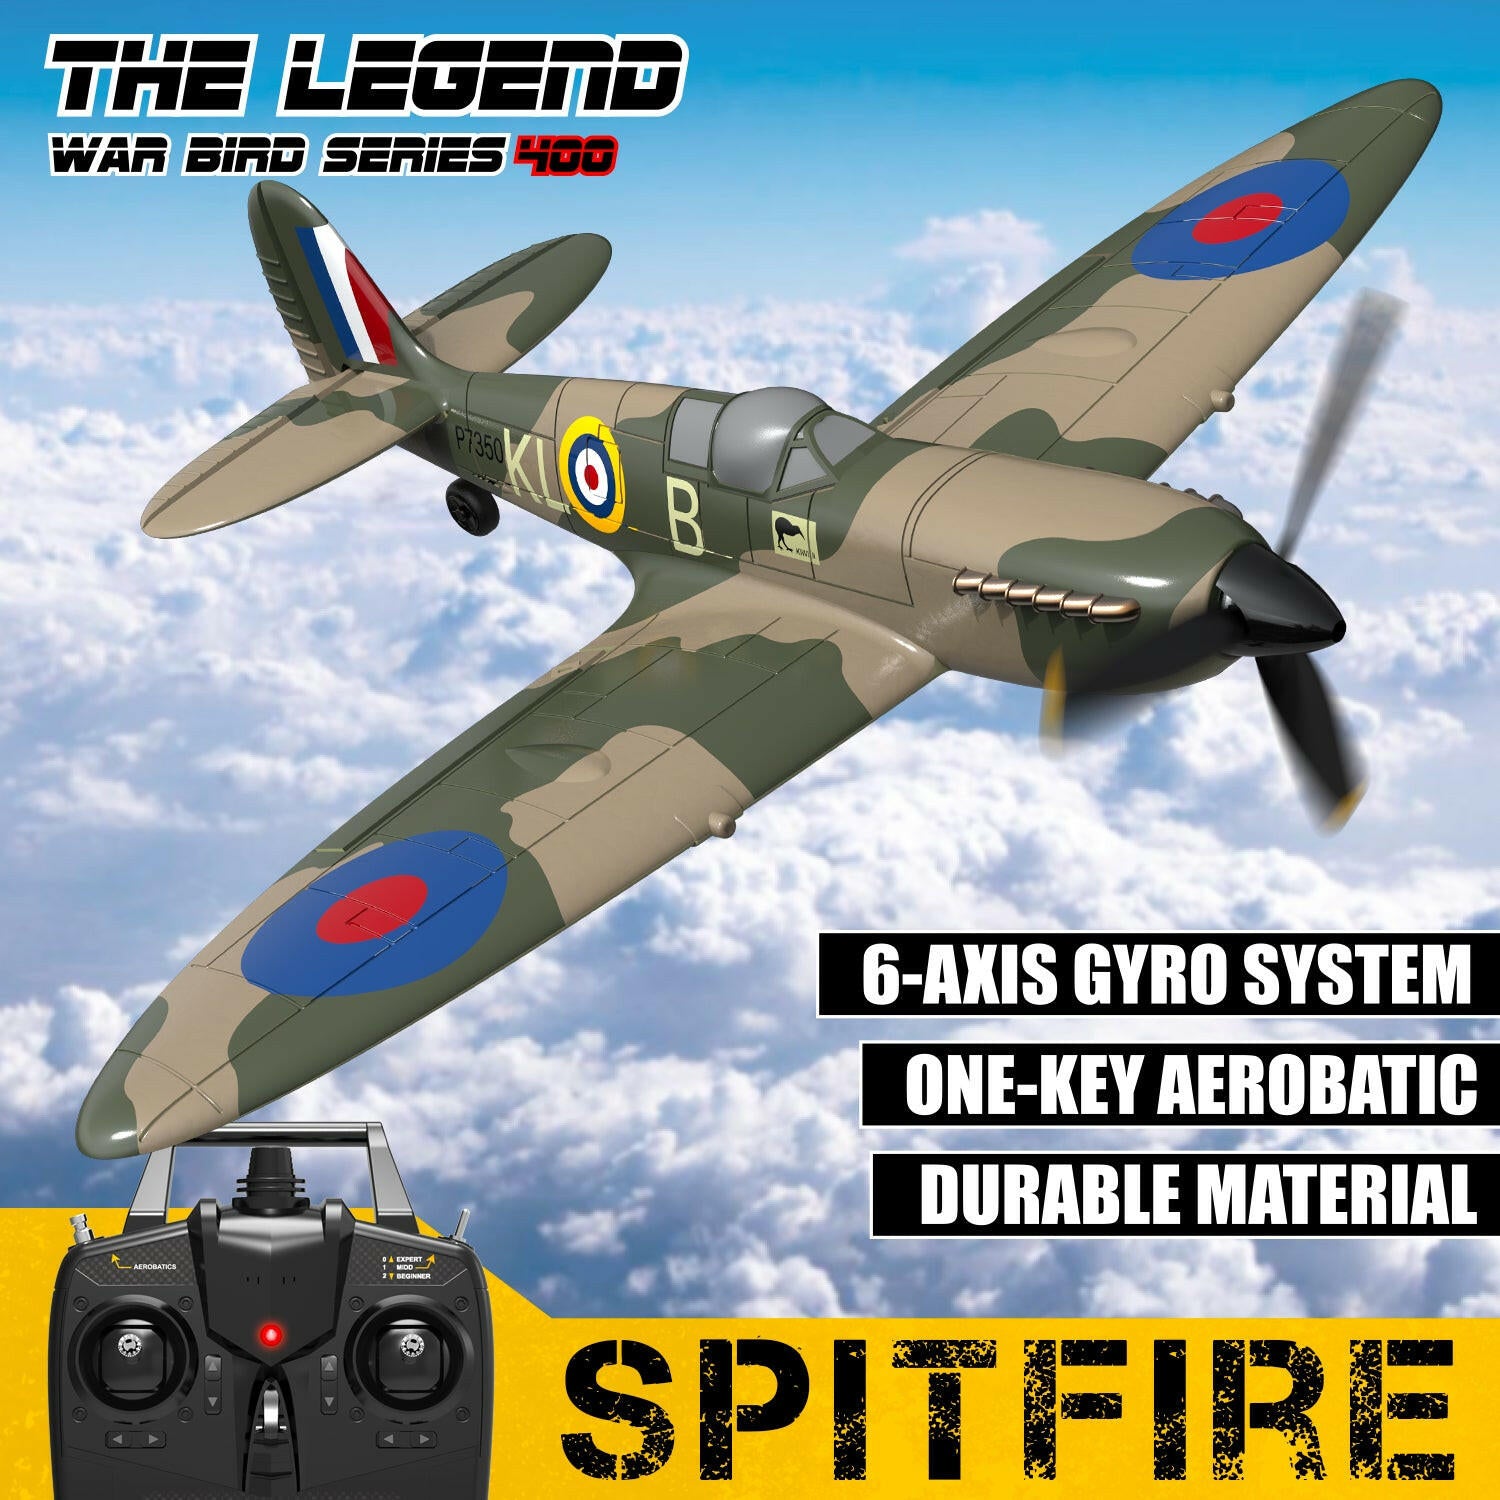 VOLANTEXRC Spitfire 4-CH Remote Control Airplane Ready to Fly for Beginners with Xpilot Stabilization System (761-12) RTF - EXHOBBY